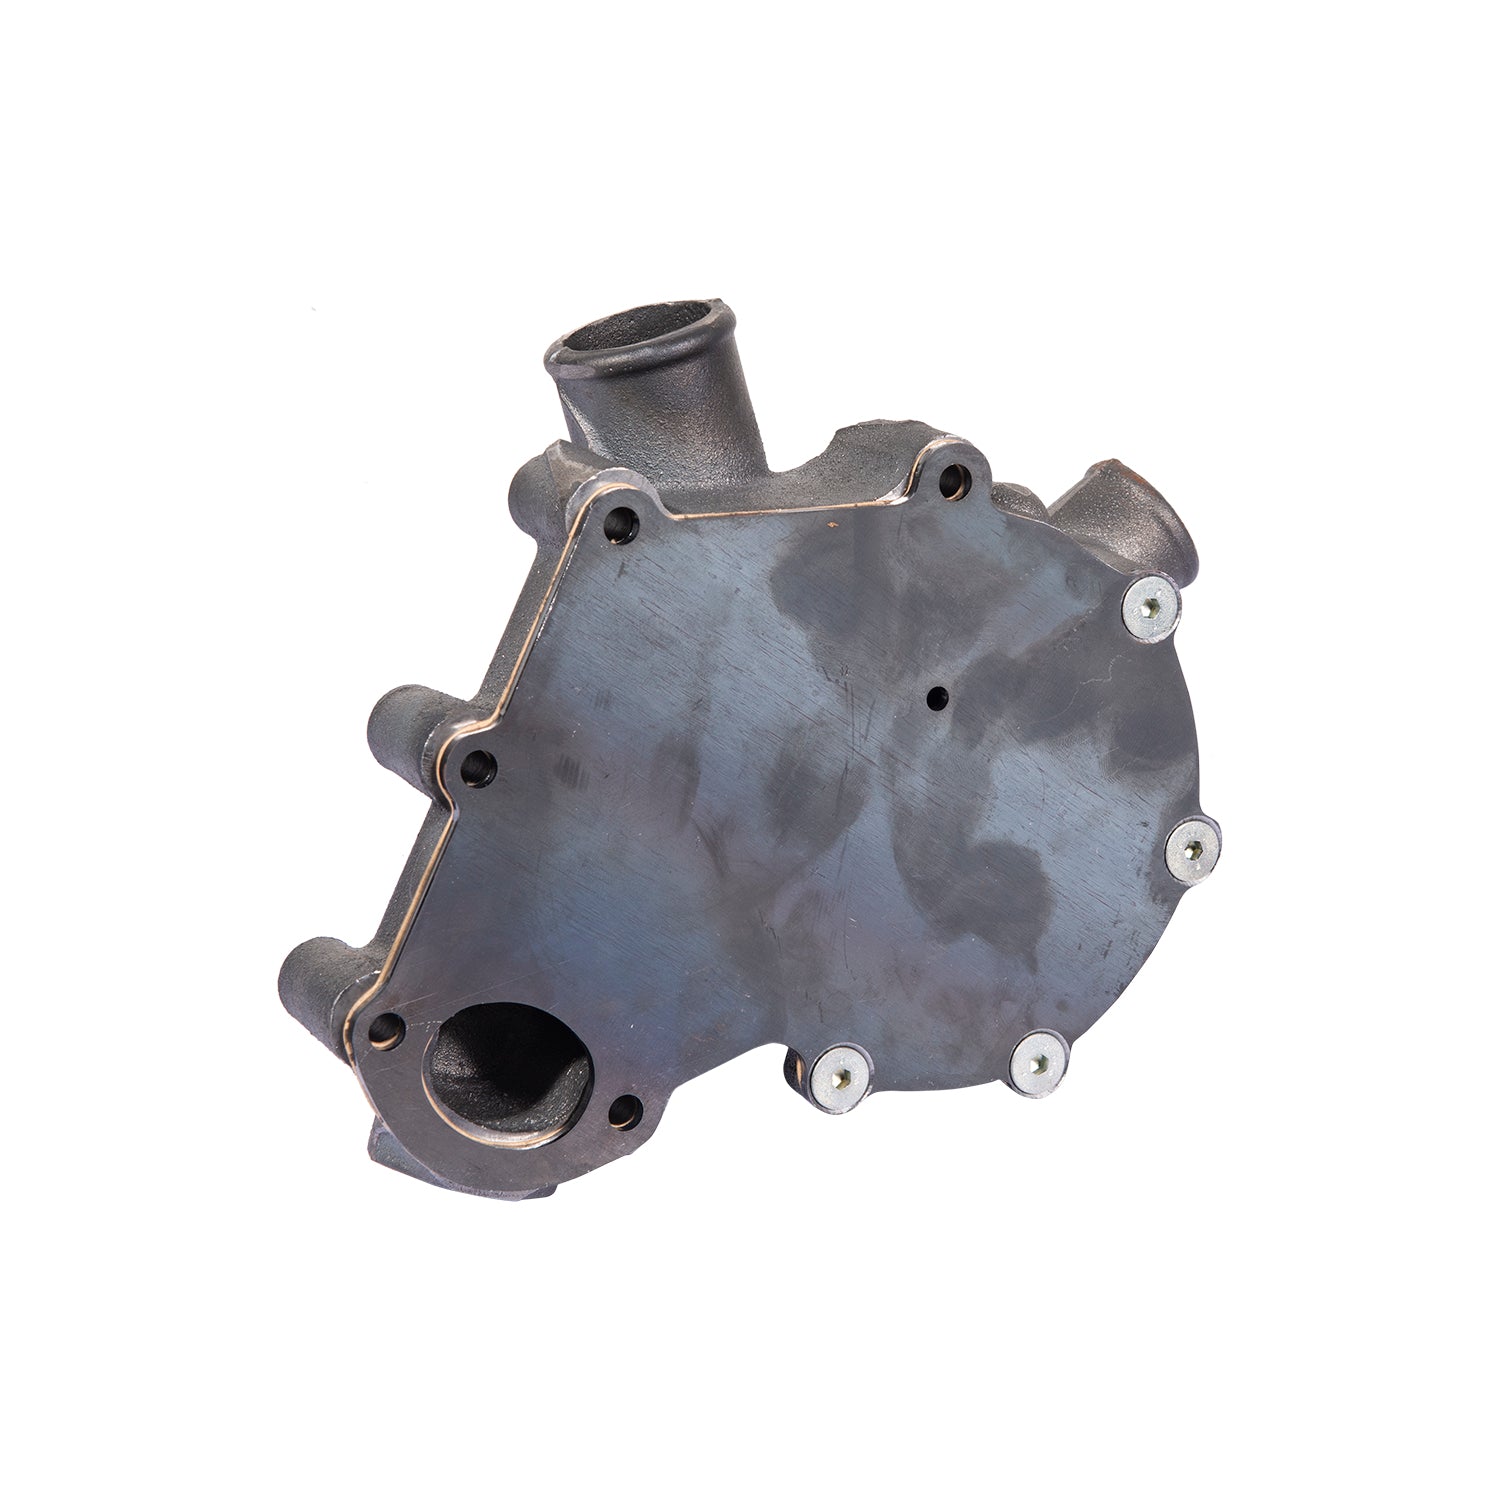 Water Pump Replacement for WHITE OLIVER FIAT 650 750 8829787 8822883